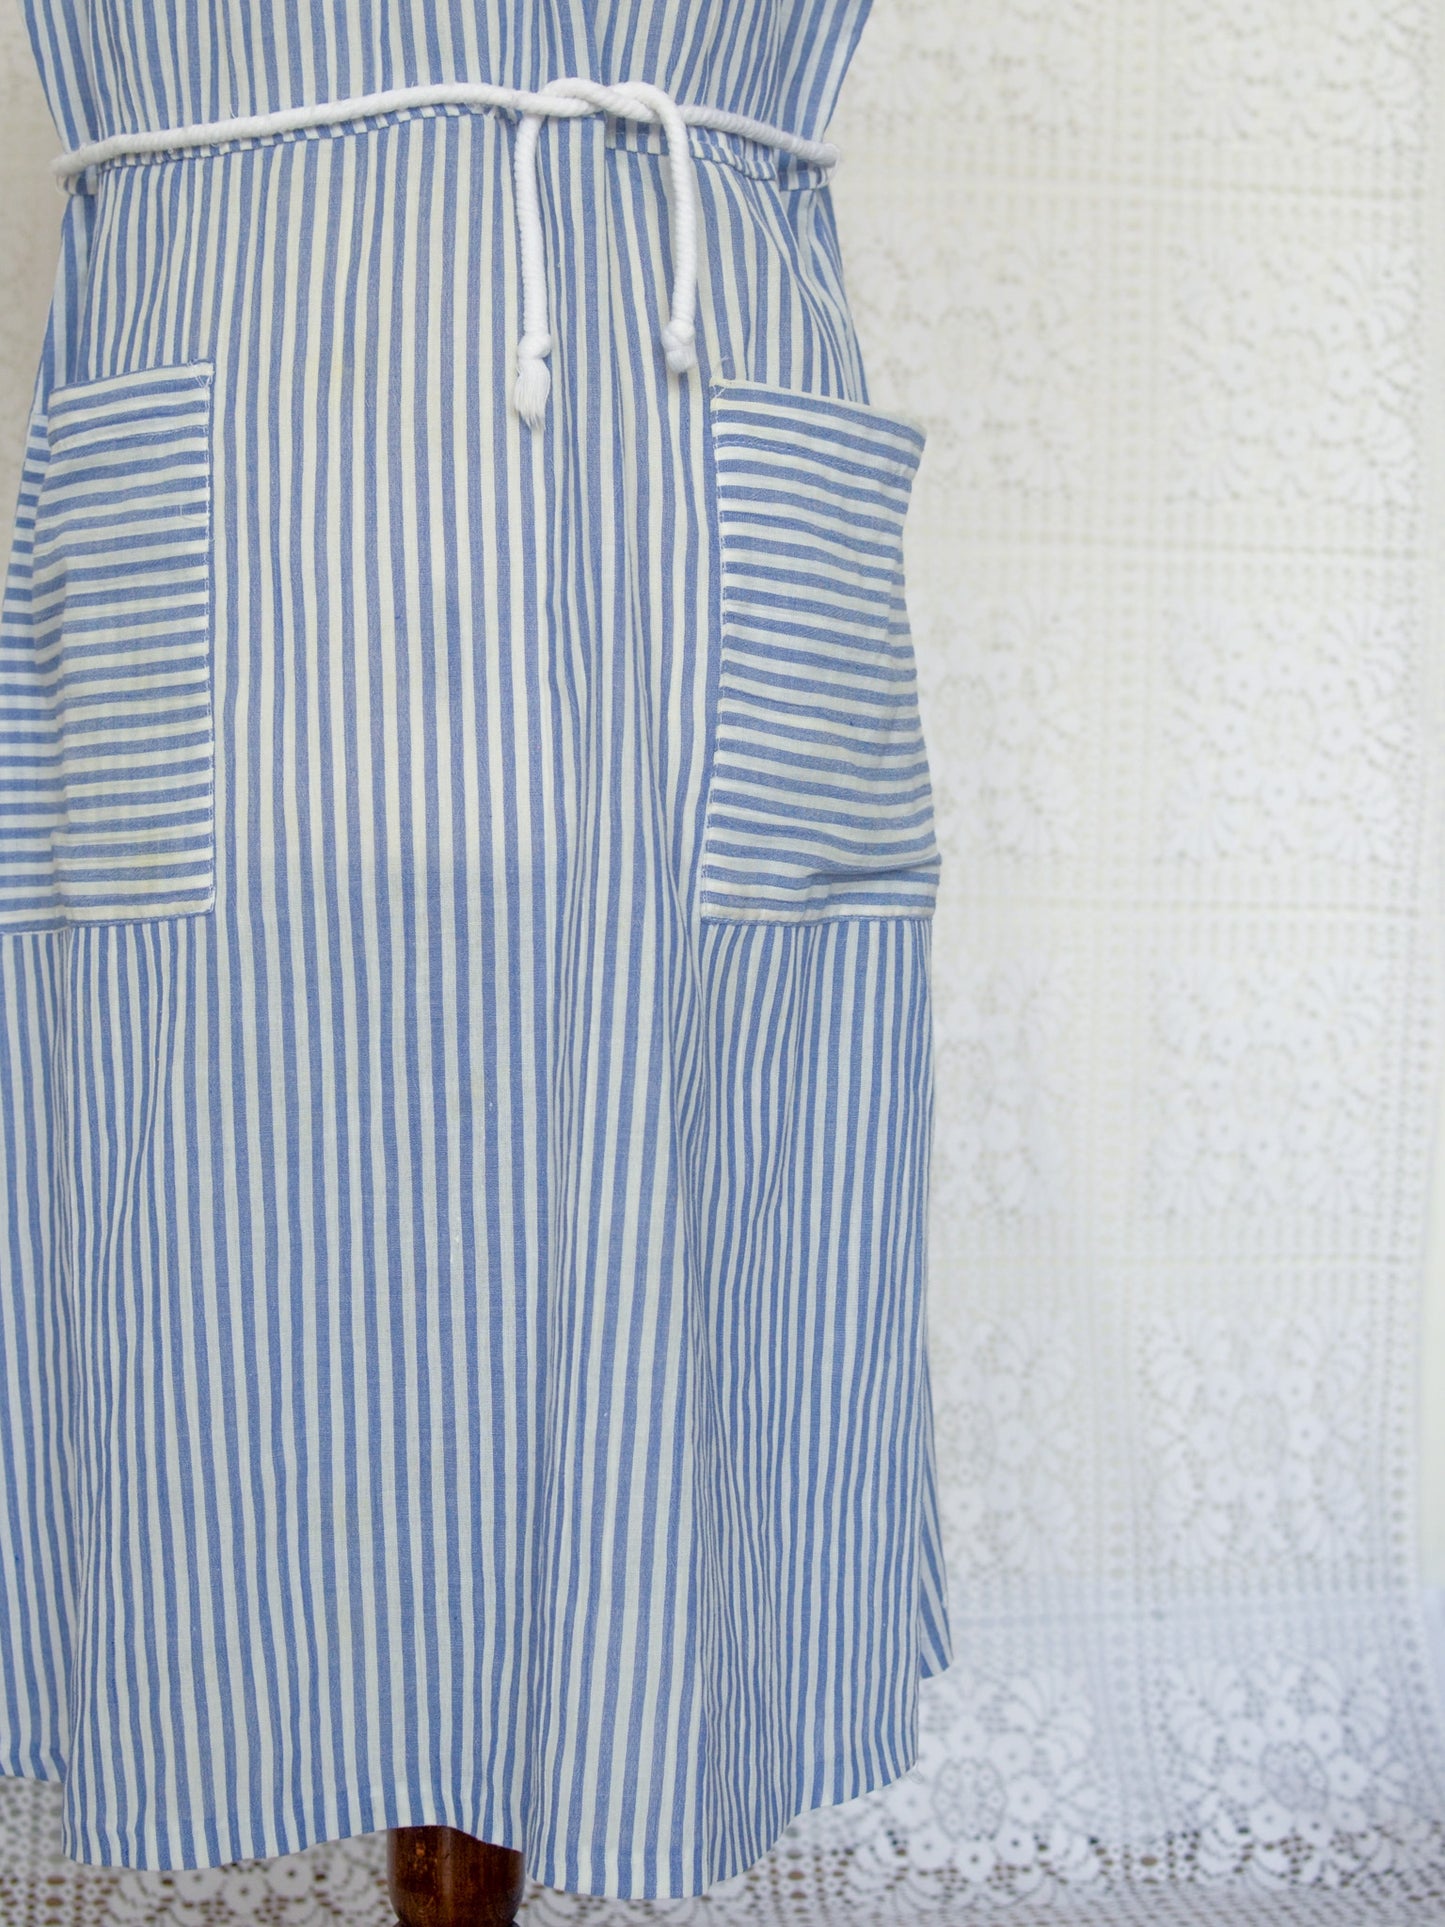 1980s blue and white striped dress with rope belt